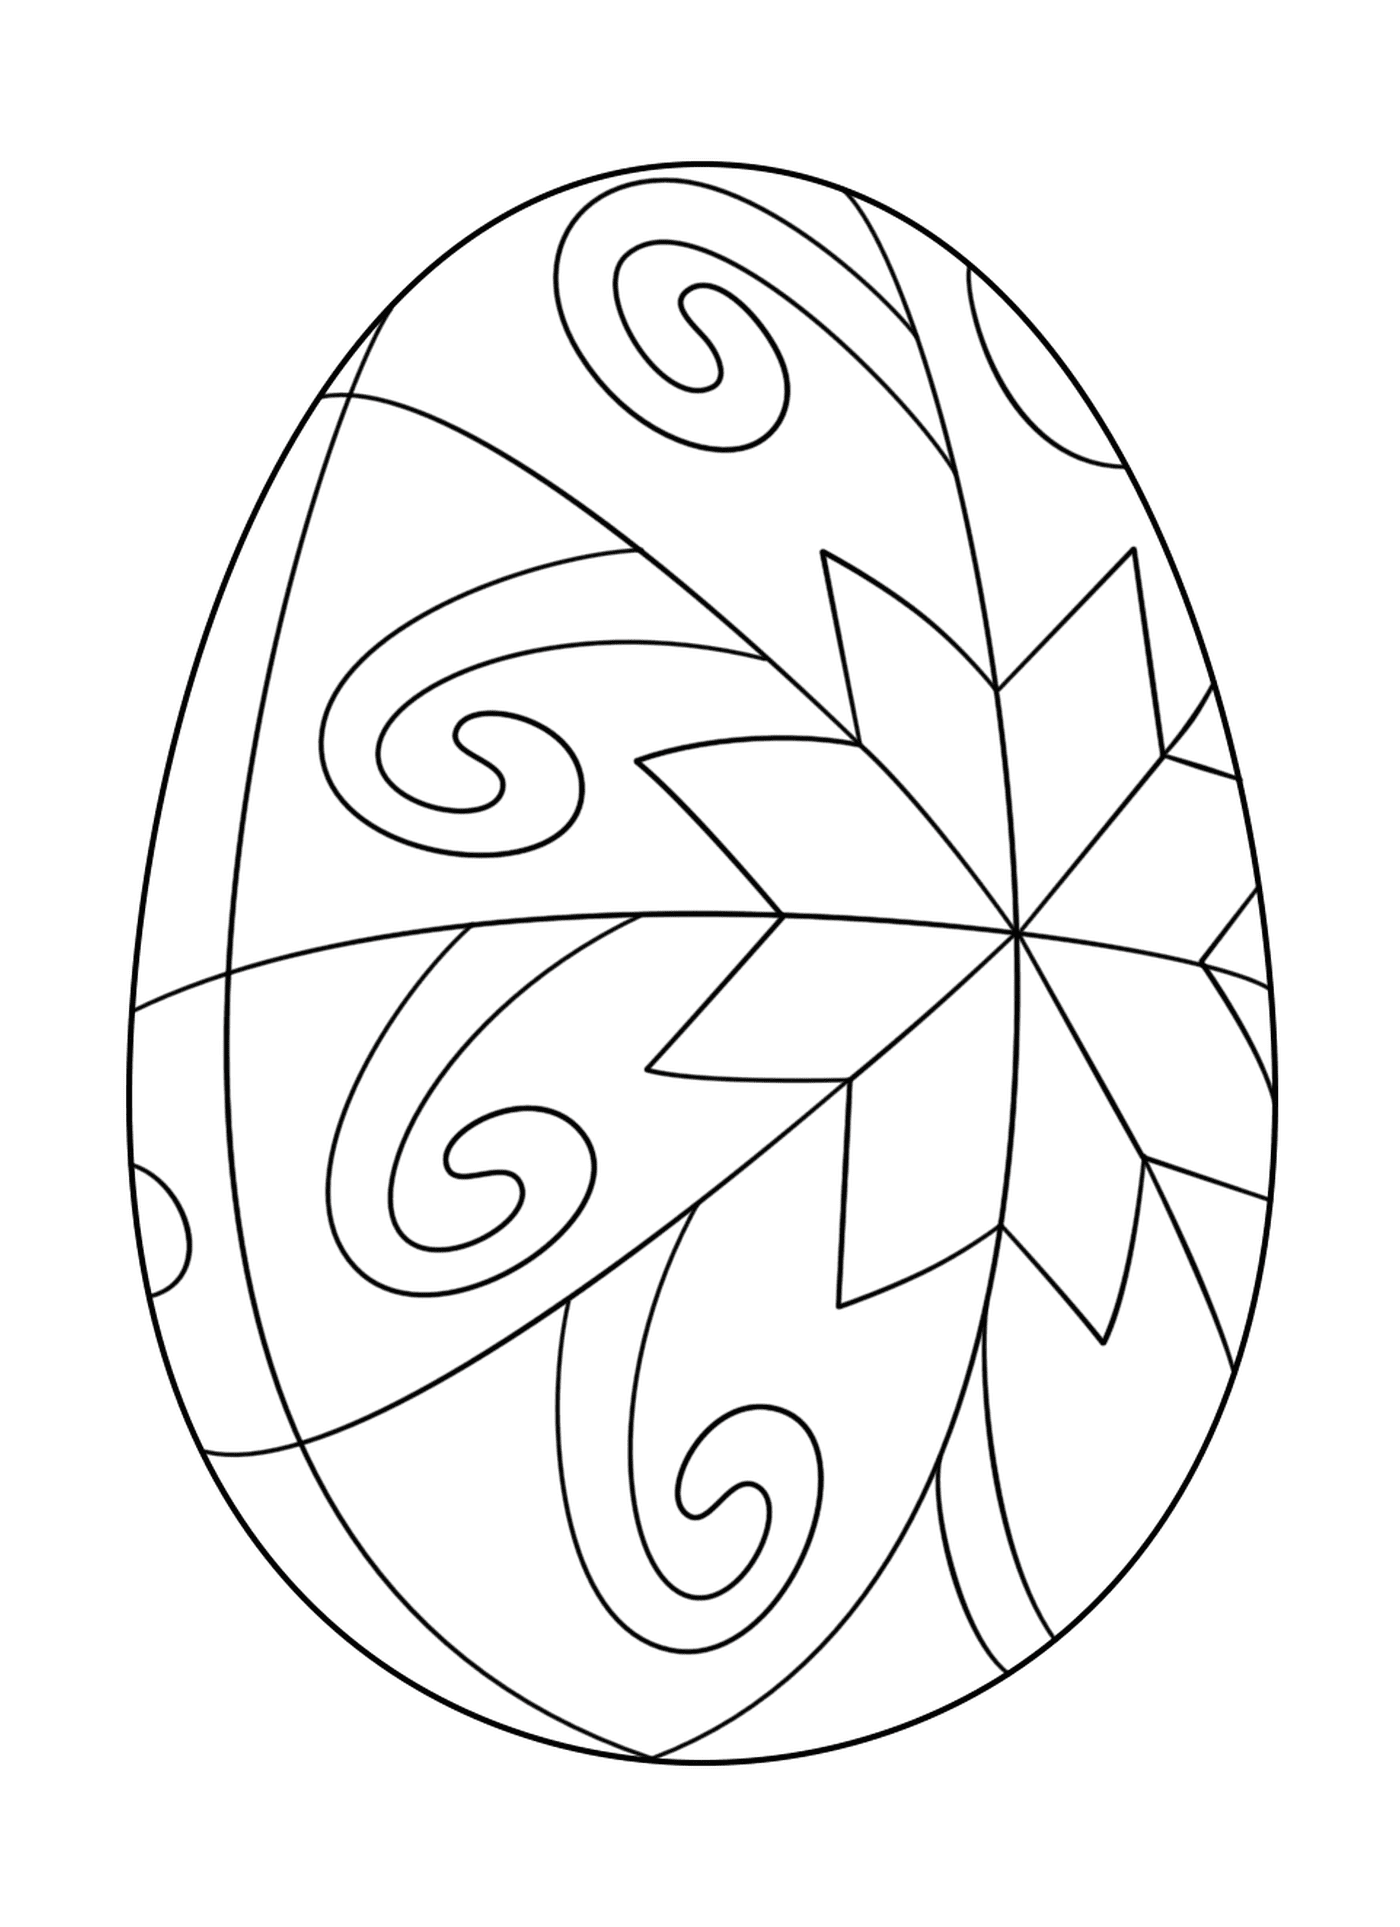  Easter egg with star motif, decorated egg 